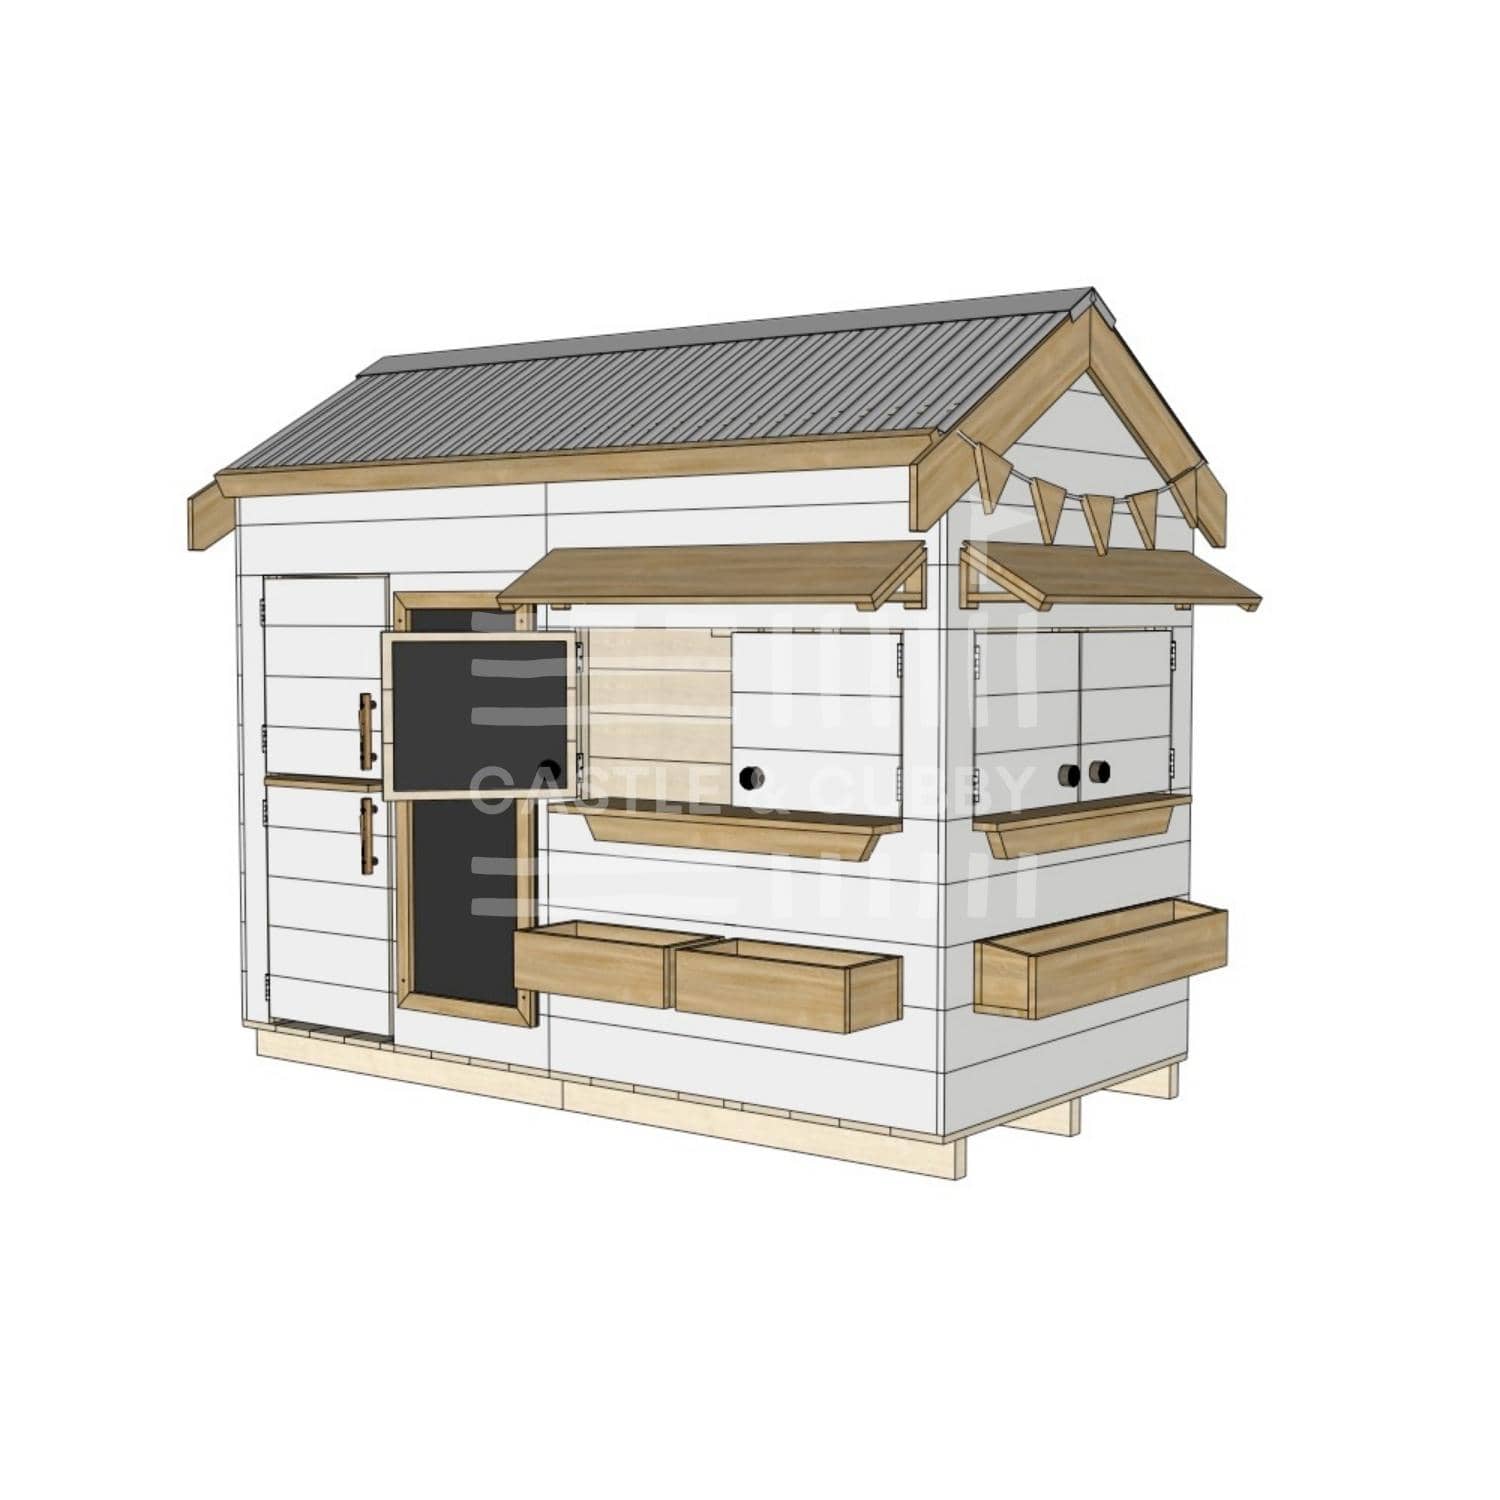 Pitched roof painted pine timber cubby house residential and family homes midi rectangle accessories